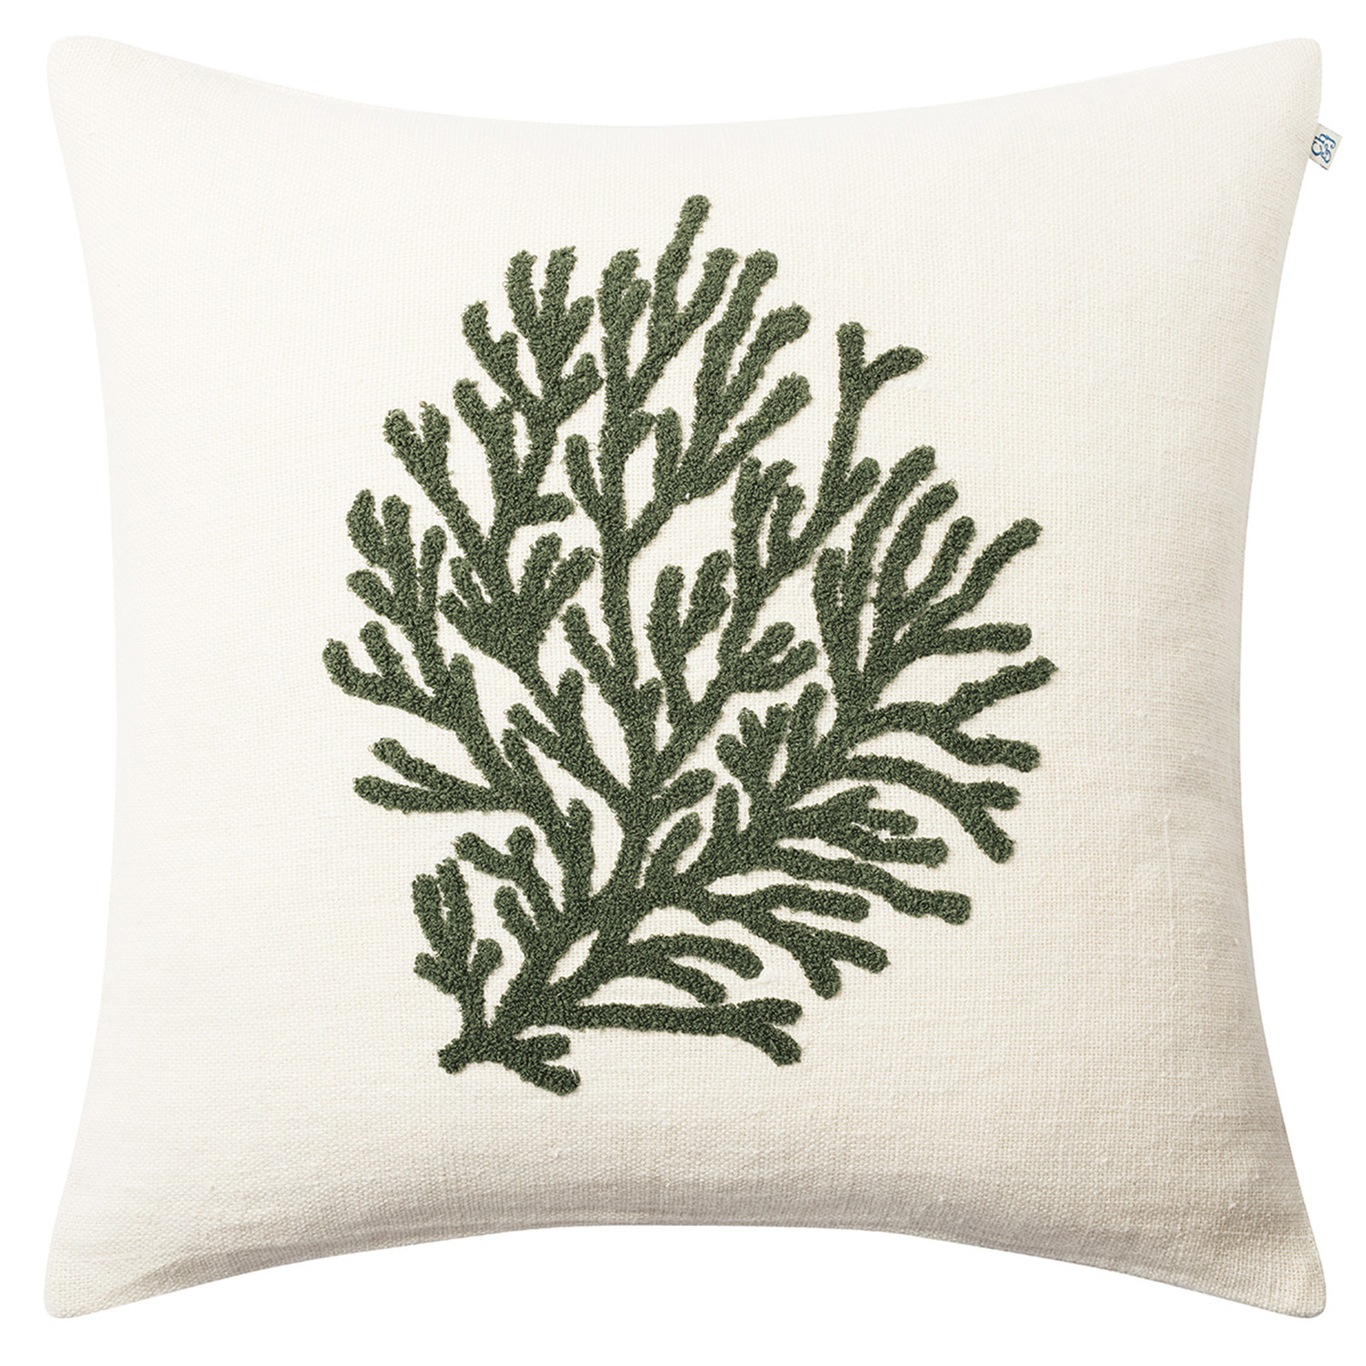 Coral Cushion Cover 50x50 cm, Off-white/Cactus Green